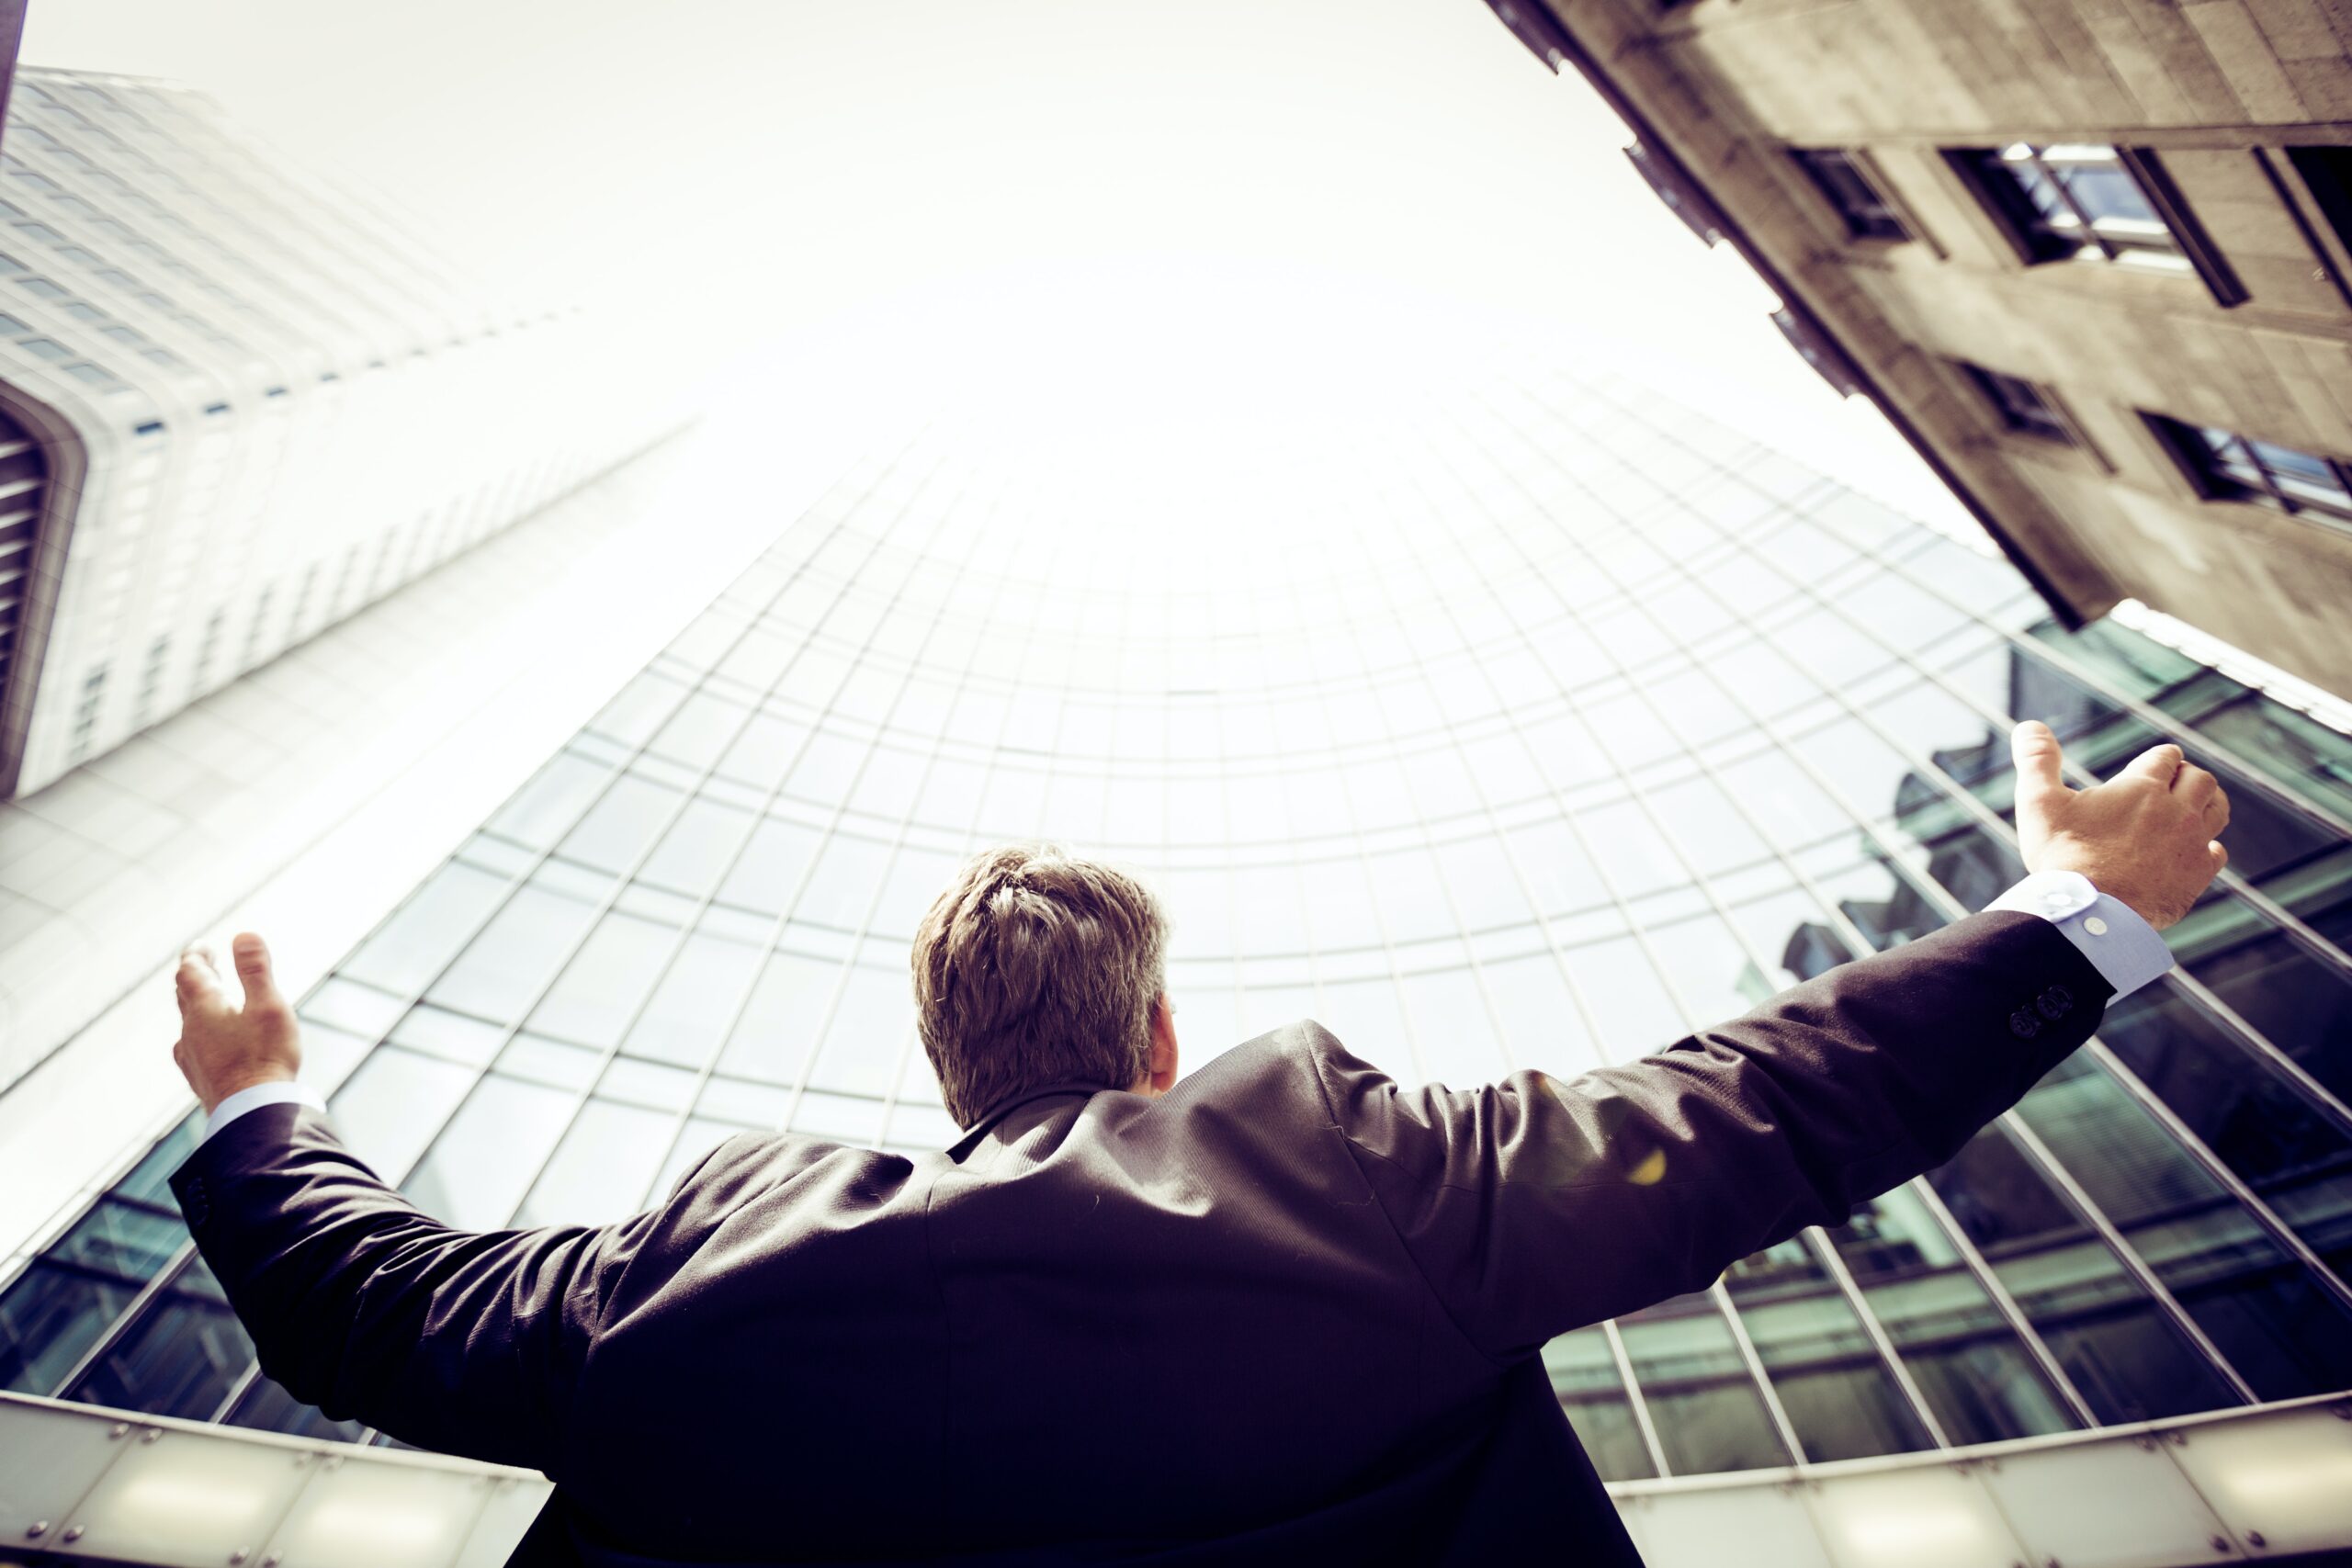 Man wearing a suit with greyed hair opens his arms up towards a tall skyscraper, the top of which is obscured by the blazing sun, representing his future career development opportunities. Photo by Razvan Chisu via Unsplash.